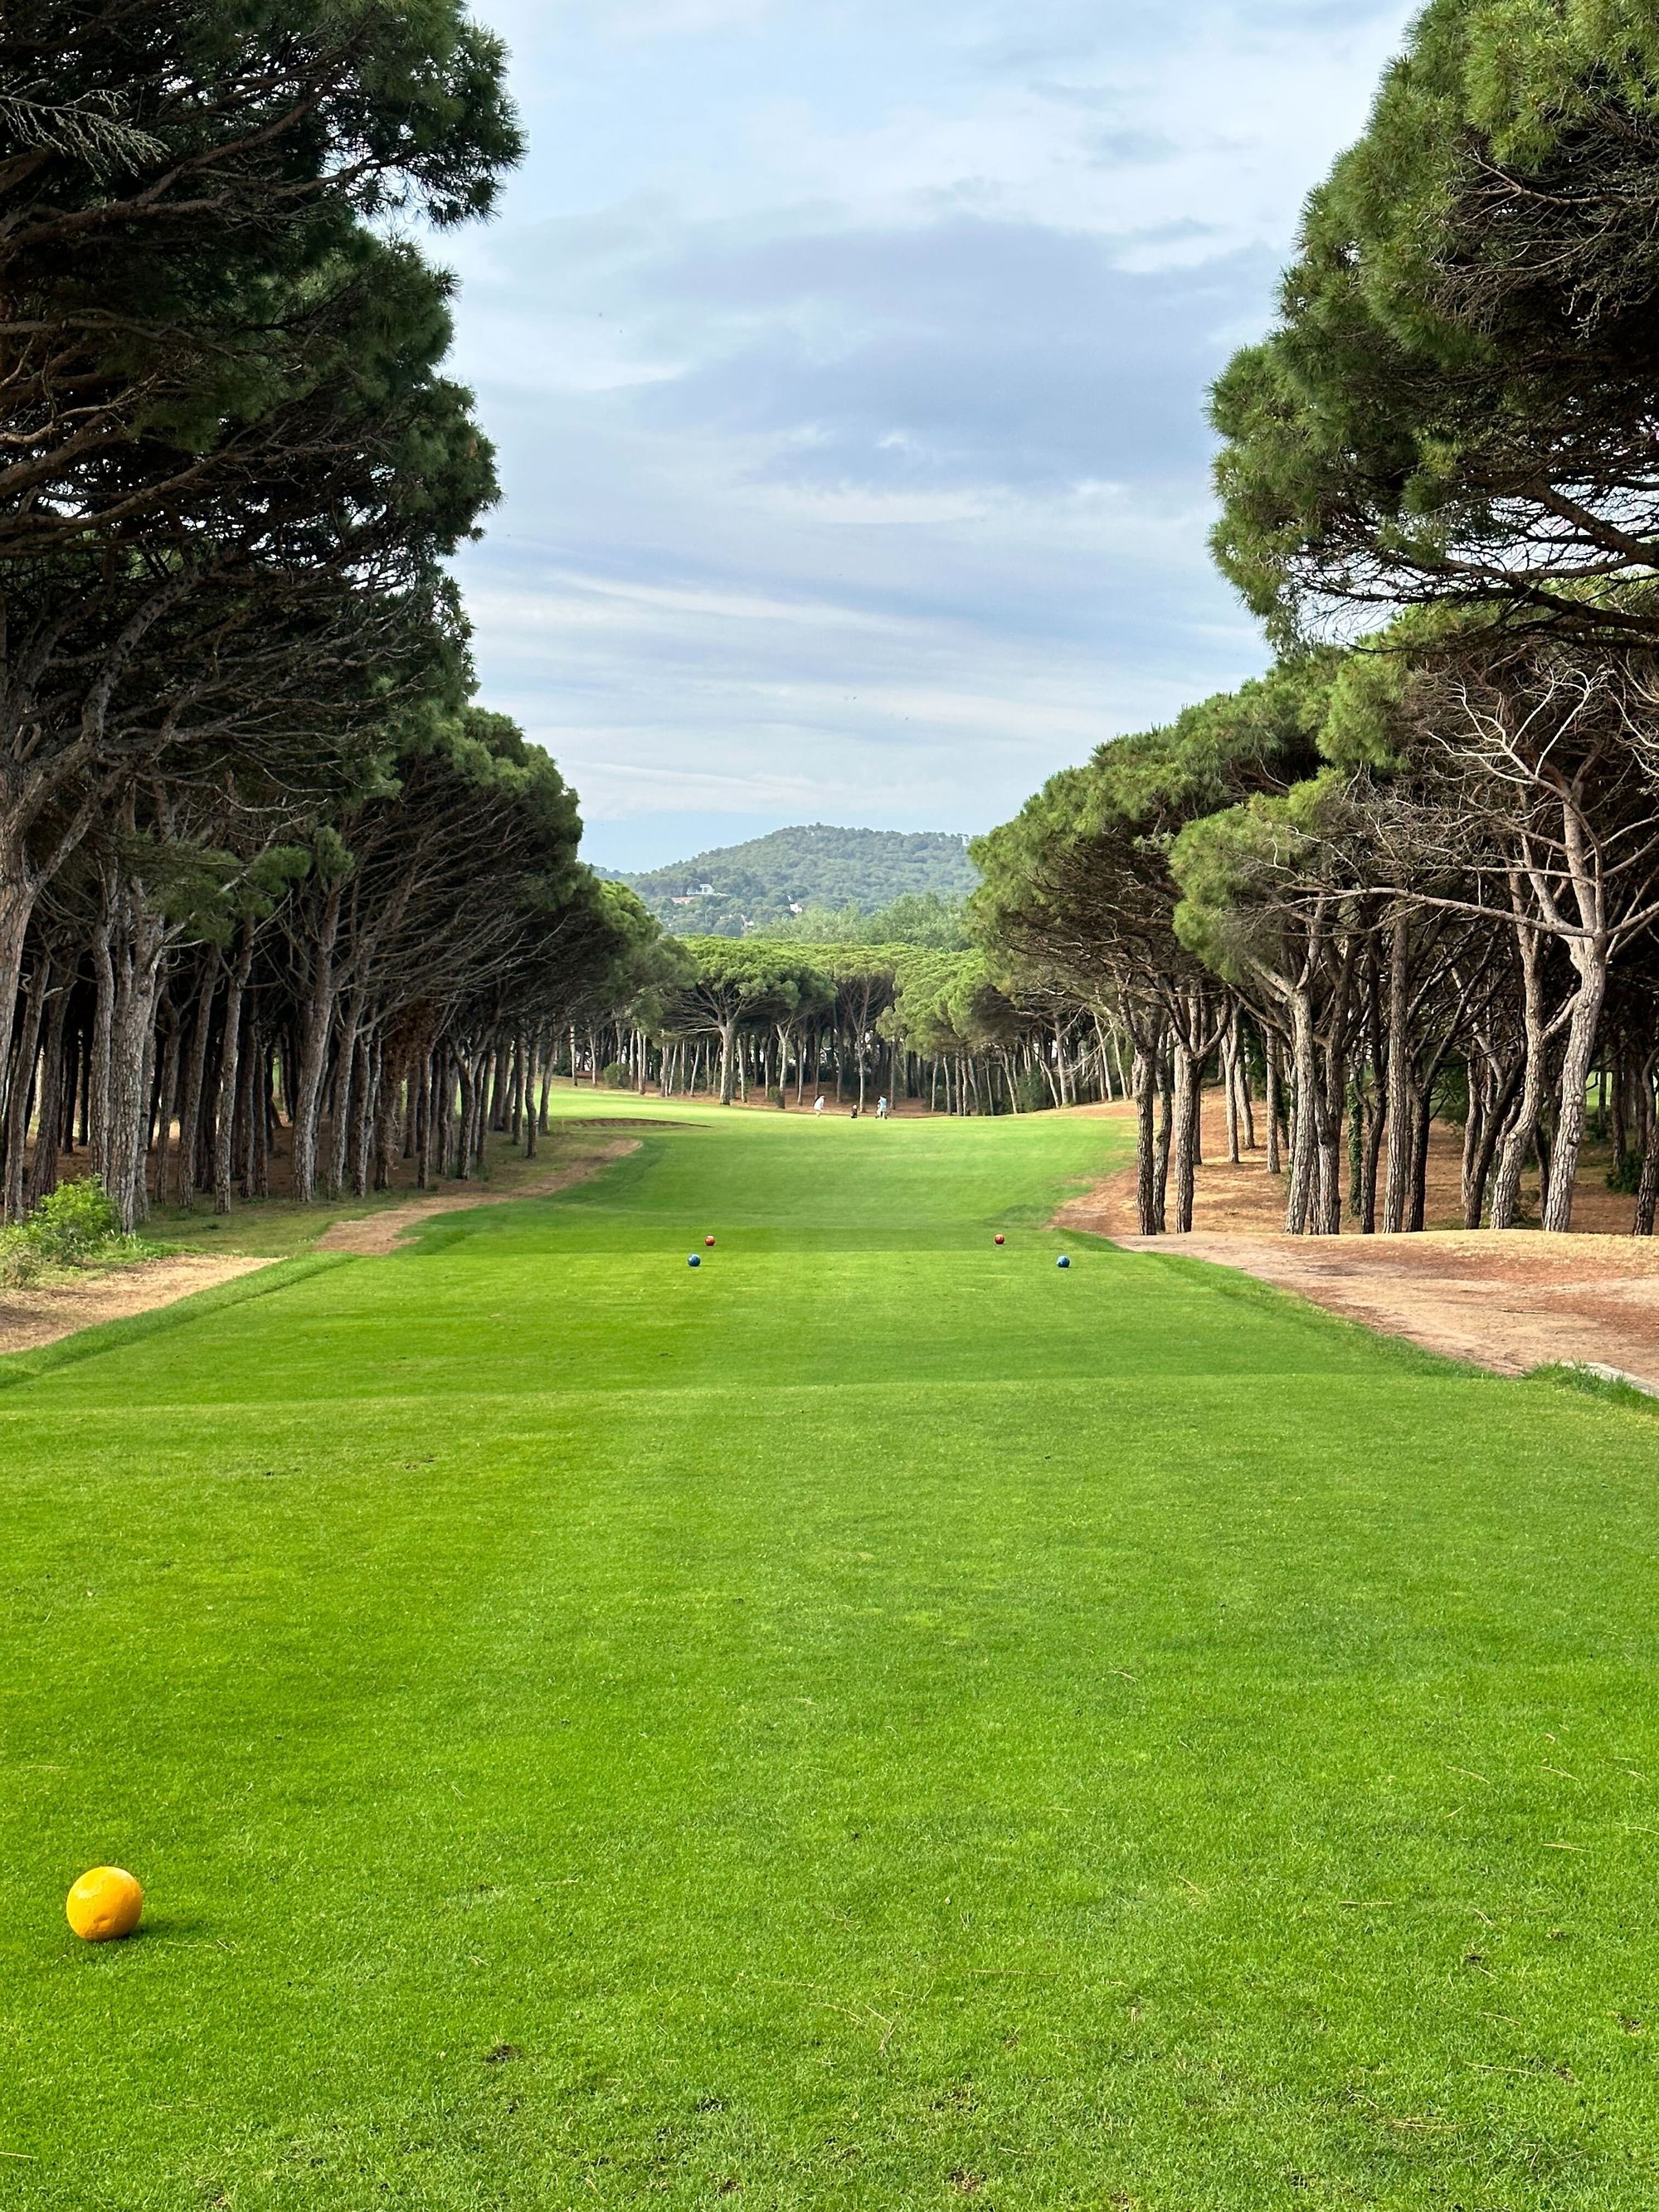 Unforgettable Golfing Getaway in Costa Brava: Experience the Best of Golf with Greenfee365